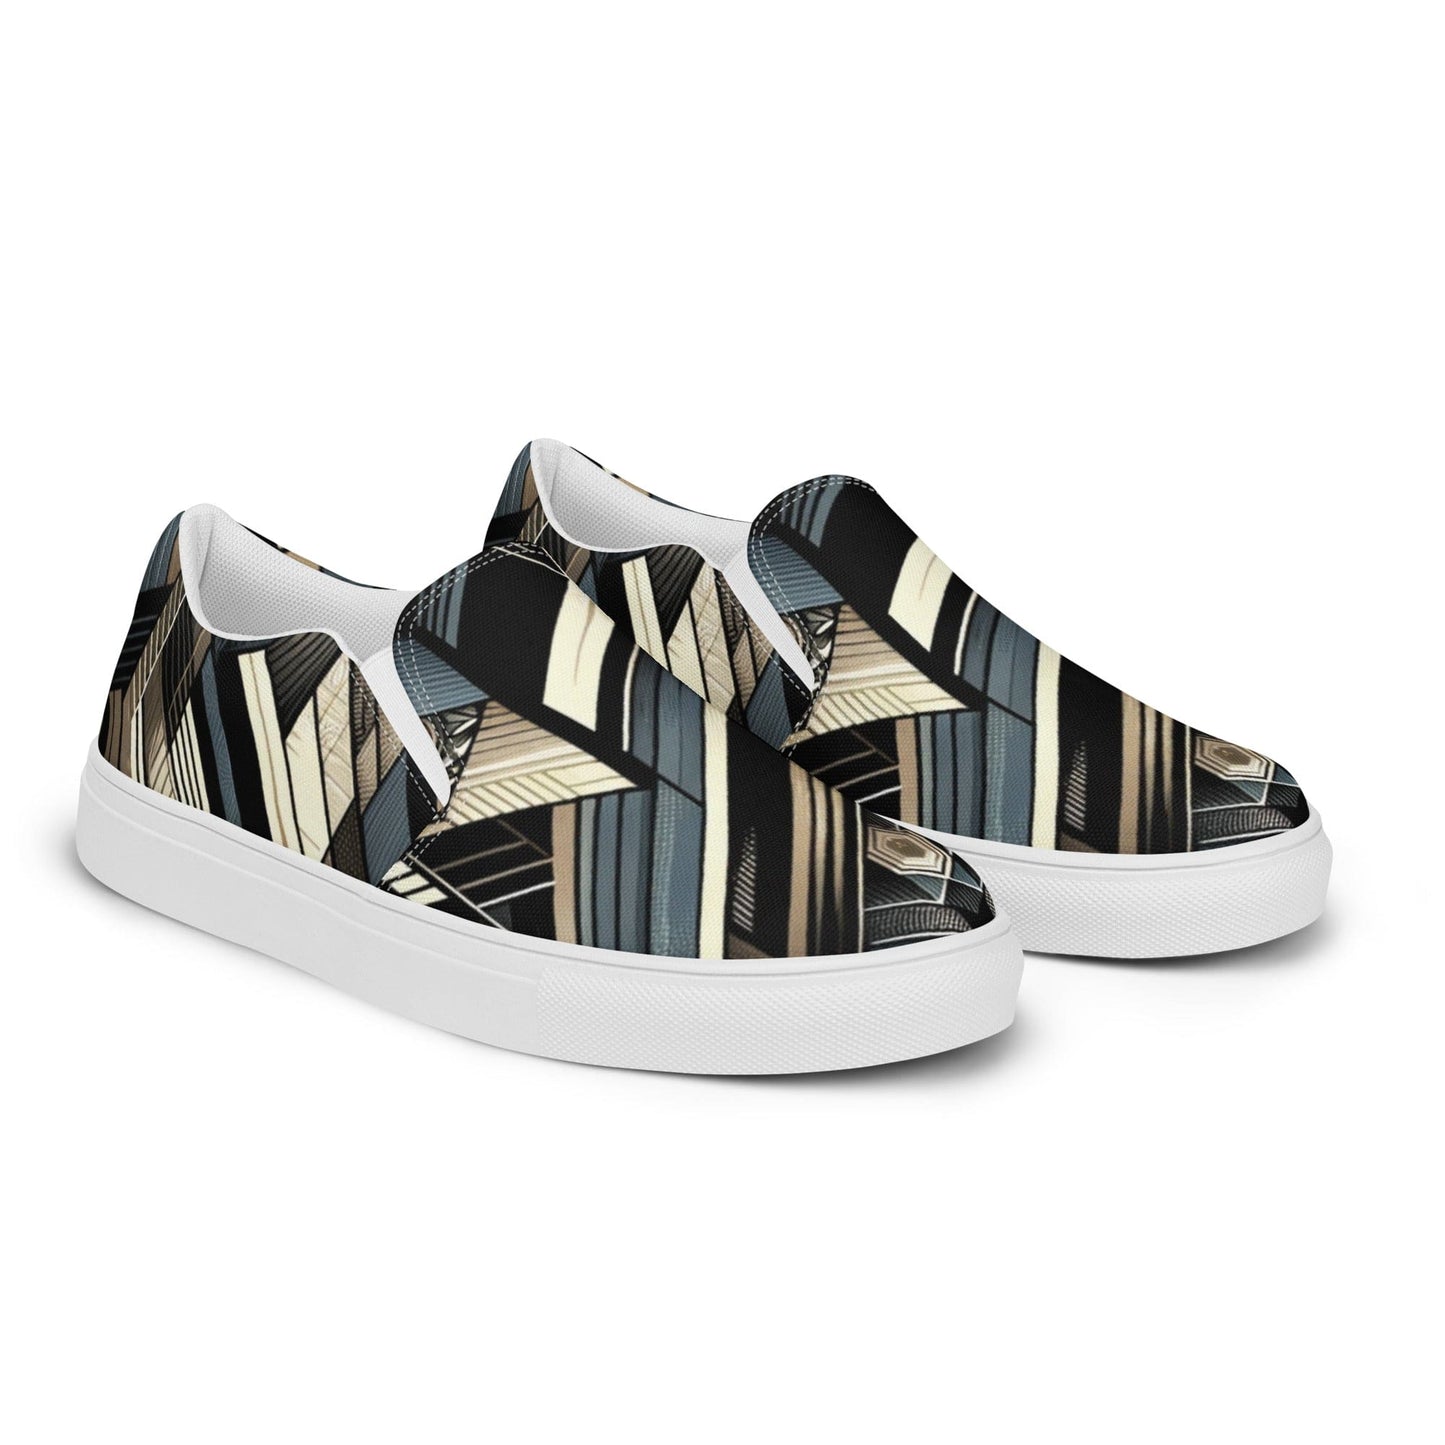 "Contemporary Canvas: Men's Modern Artistic Pattern Slip-On Canvas Shoes" - AIBUYDESIGN